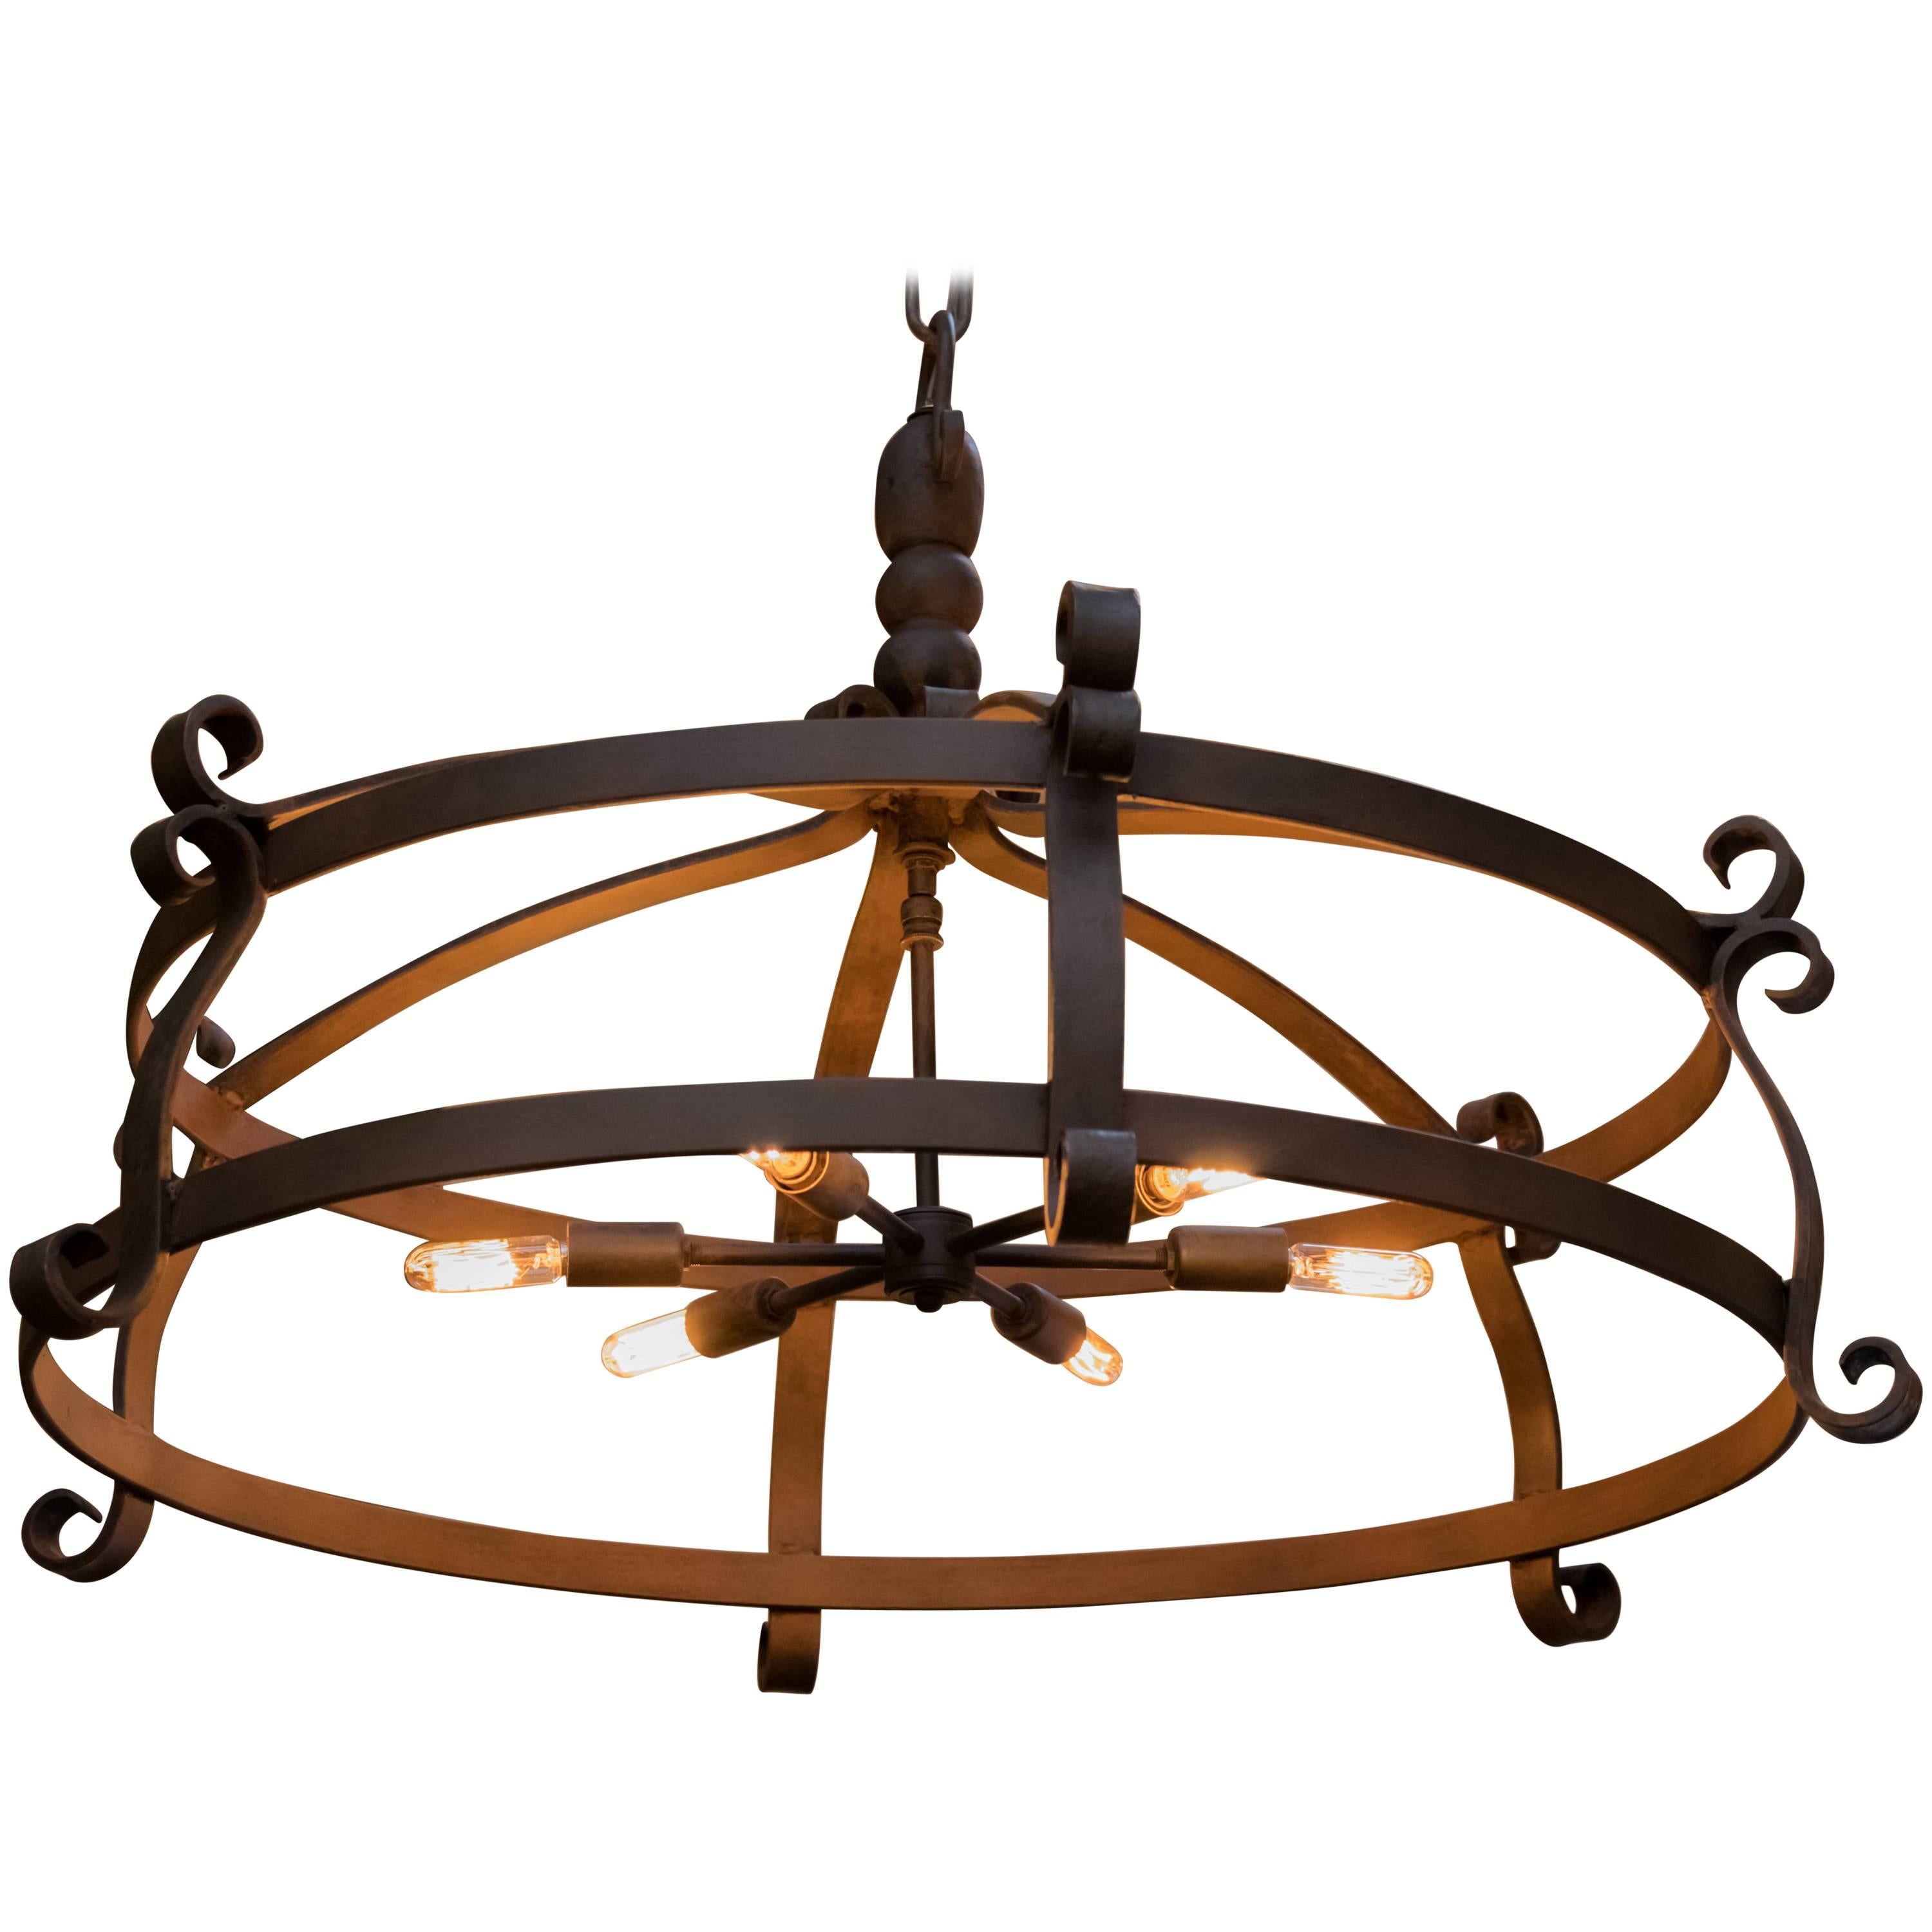 Over-Sized Hand-Forged Iron Round Chandelier with Six Lights. Farmhouse style 